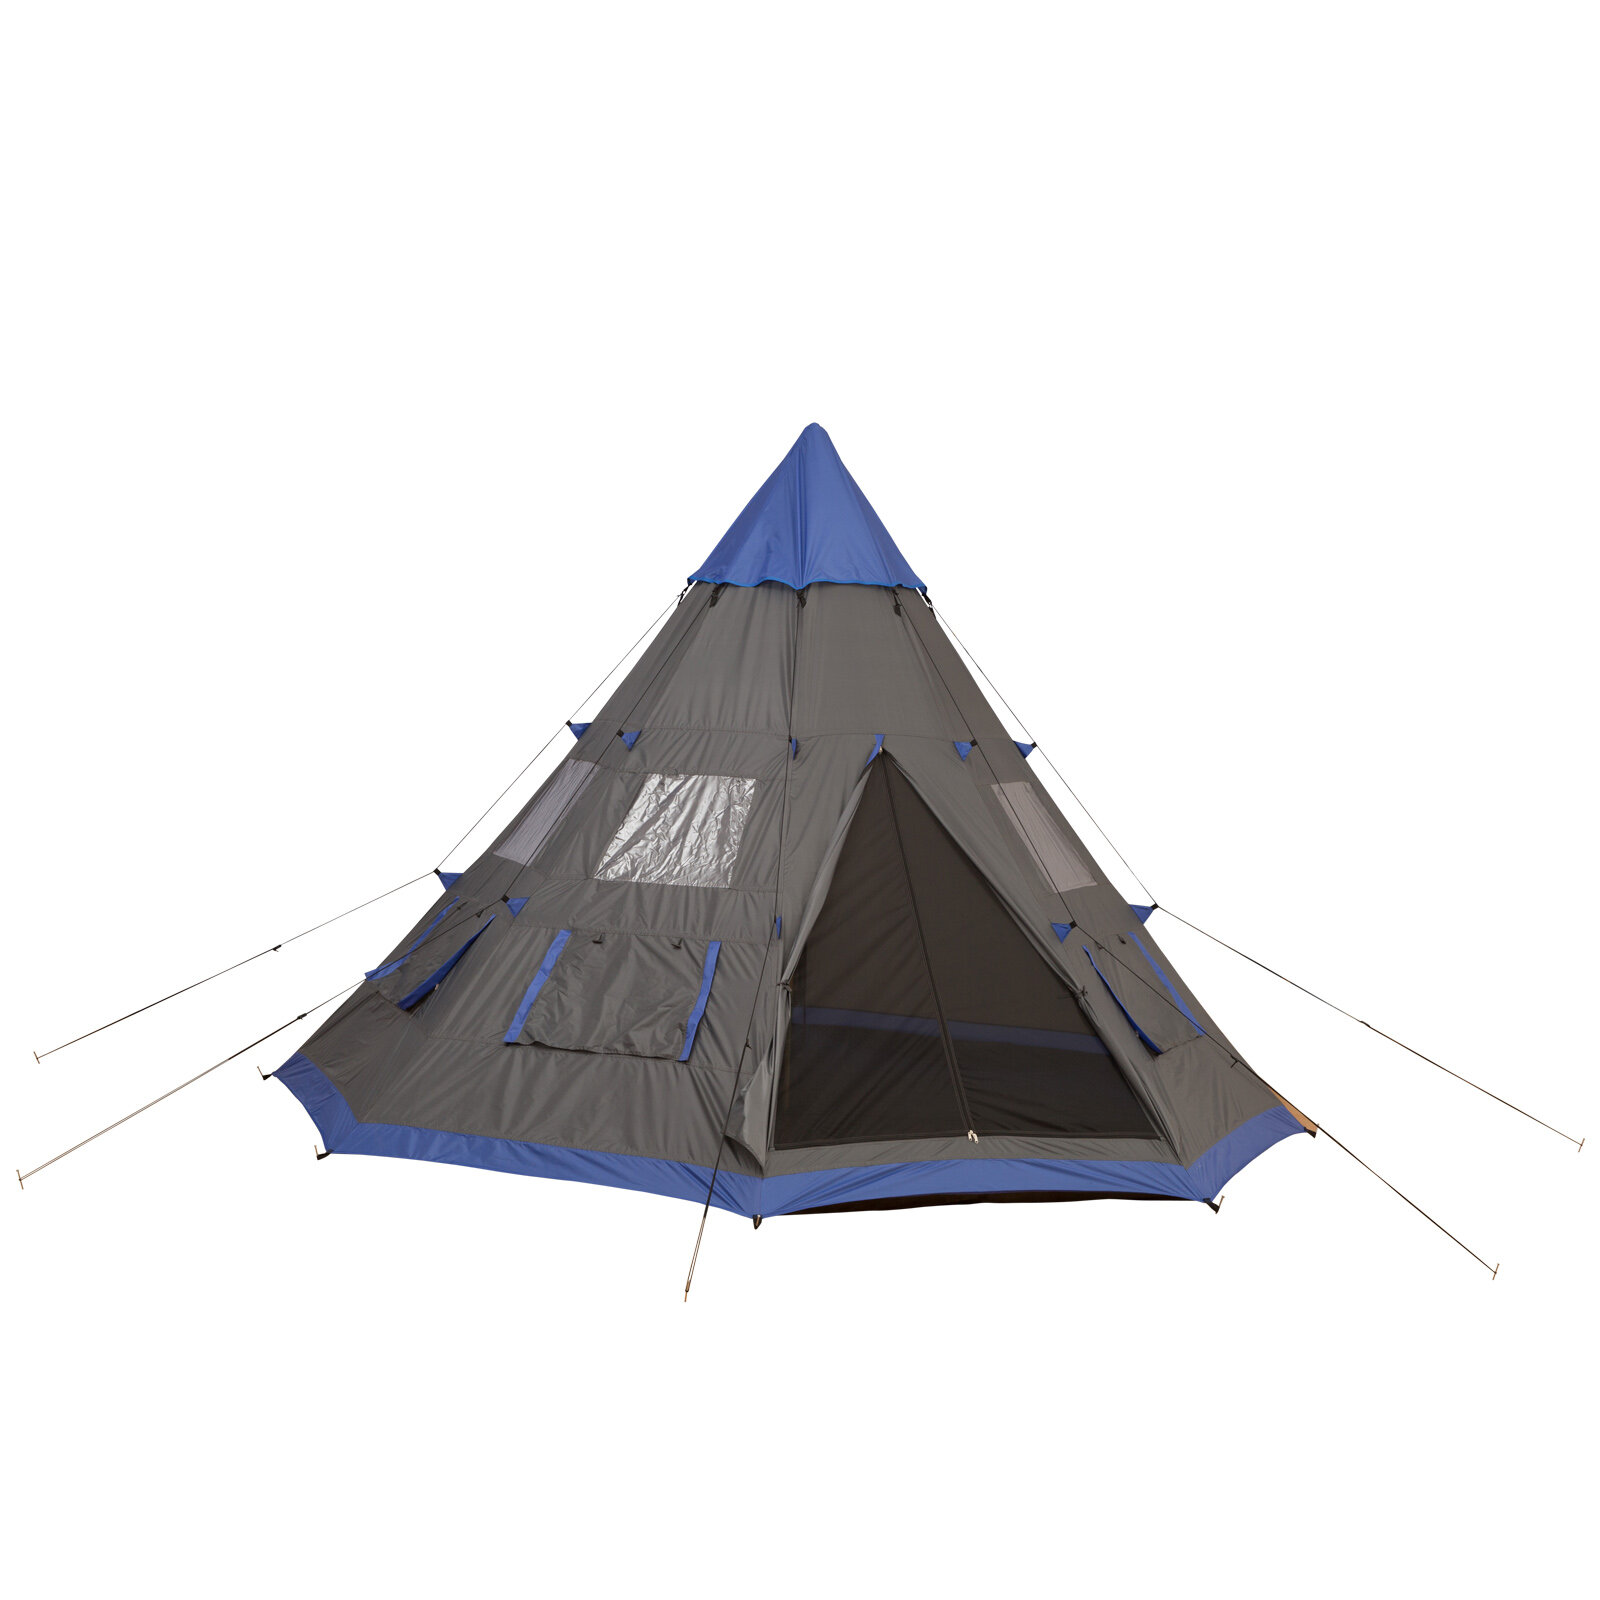 Tents by Outwell® - Shop among +65 camping tents online now